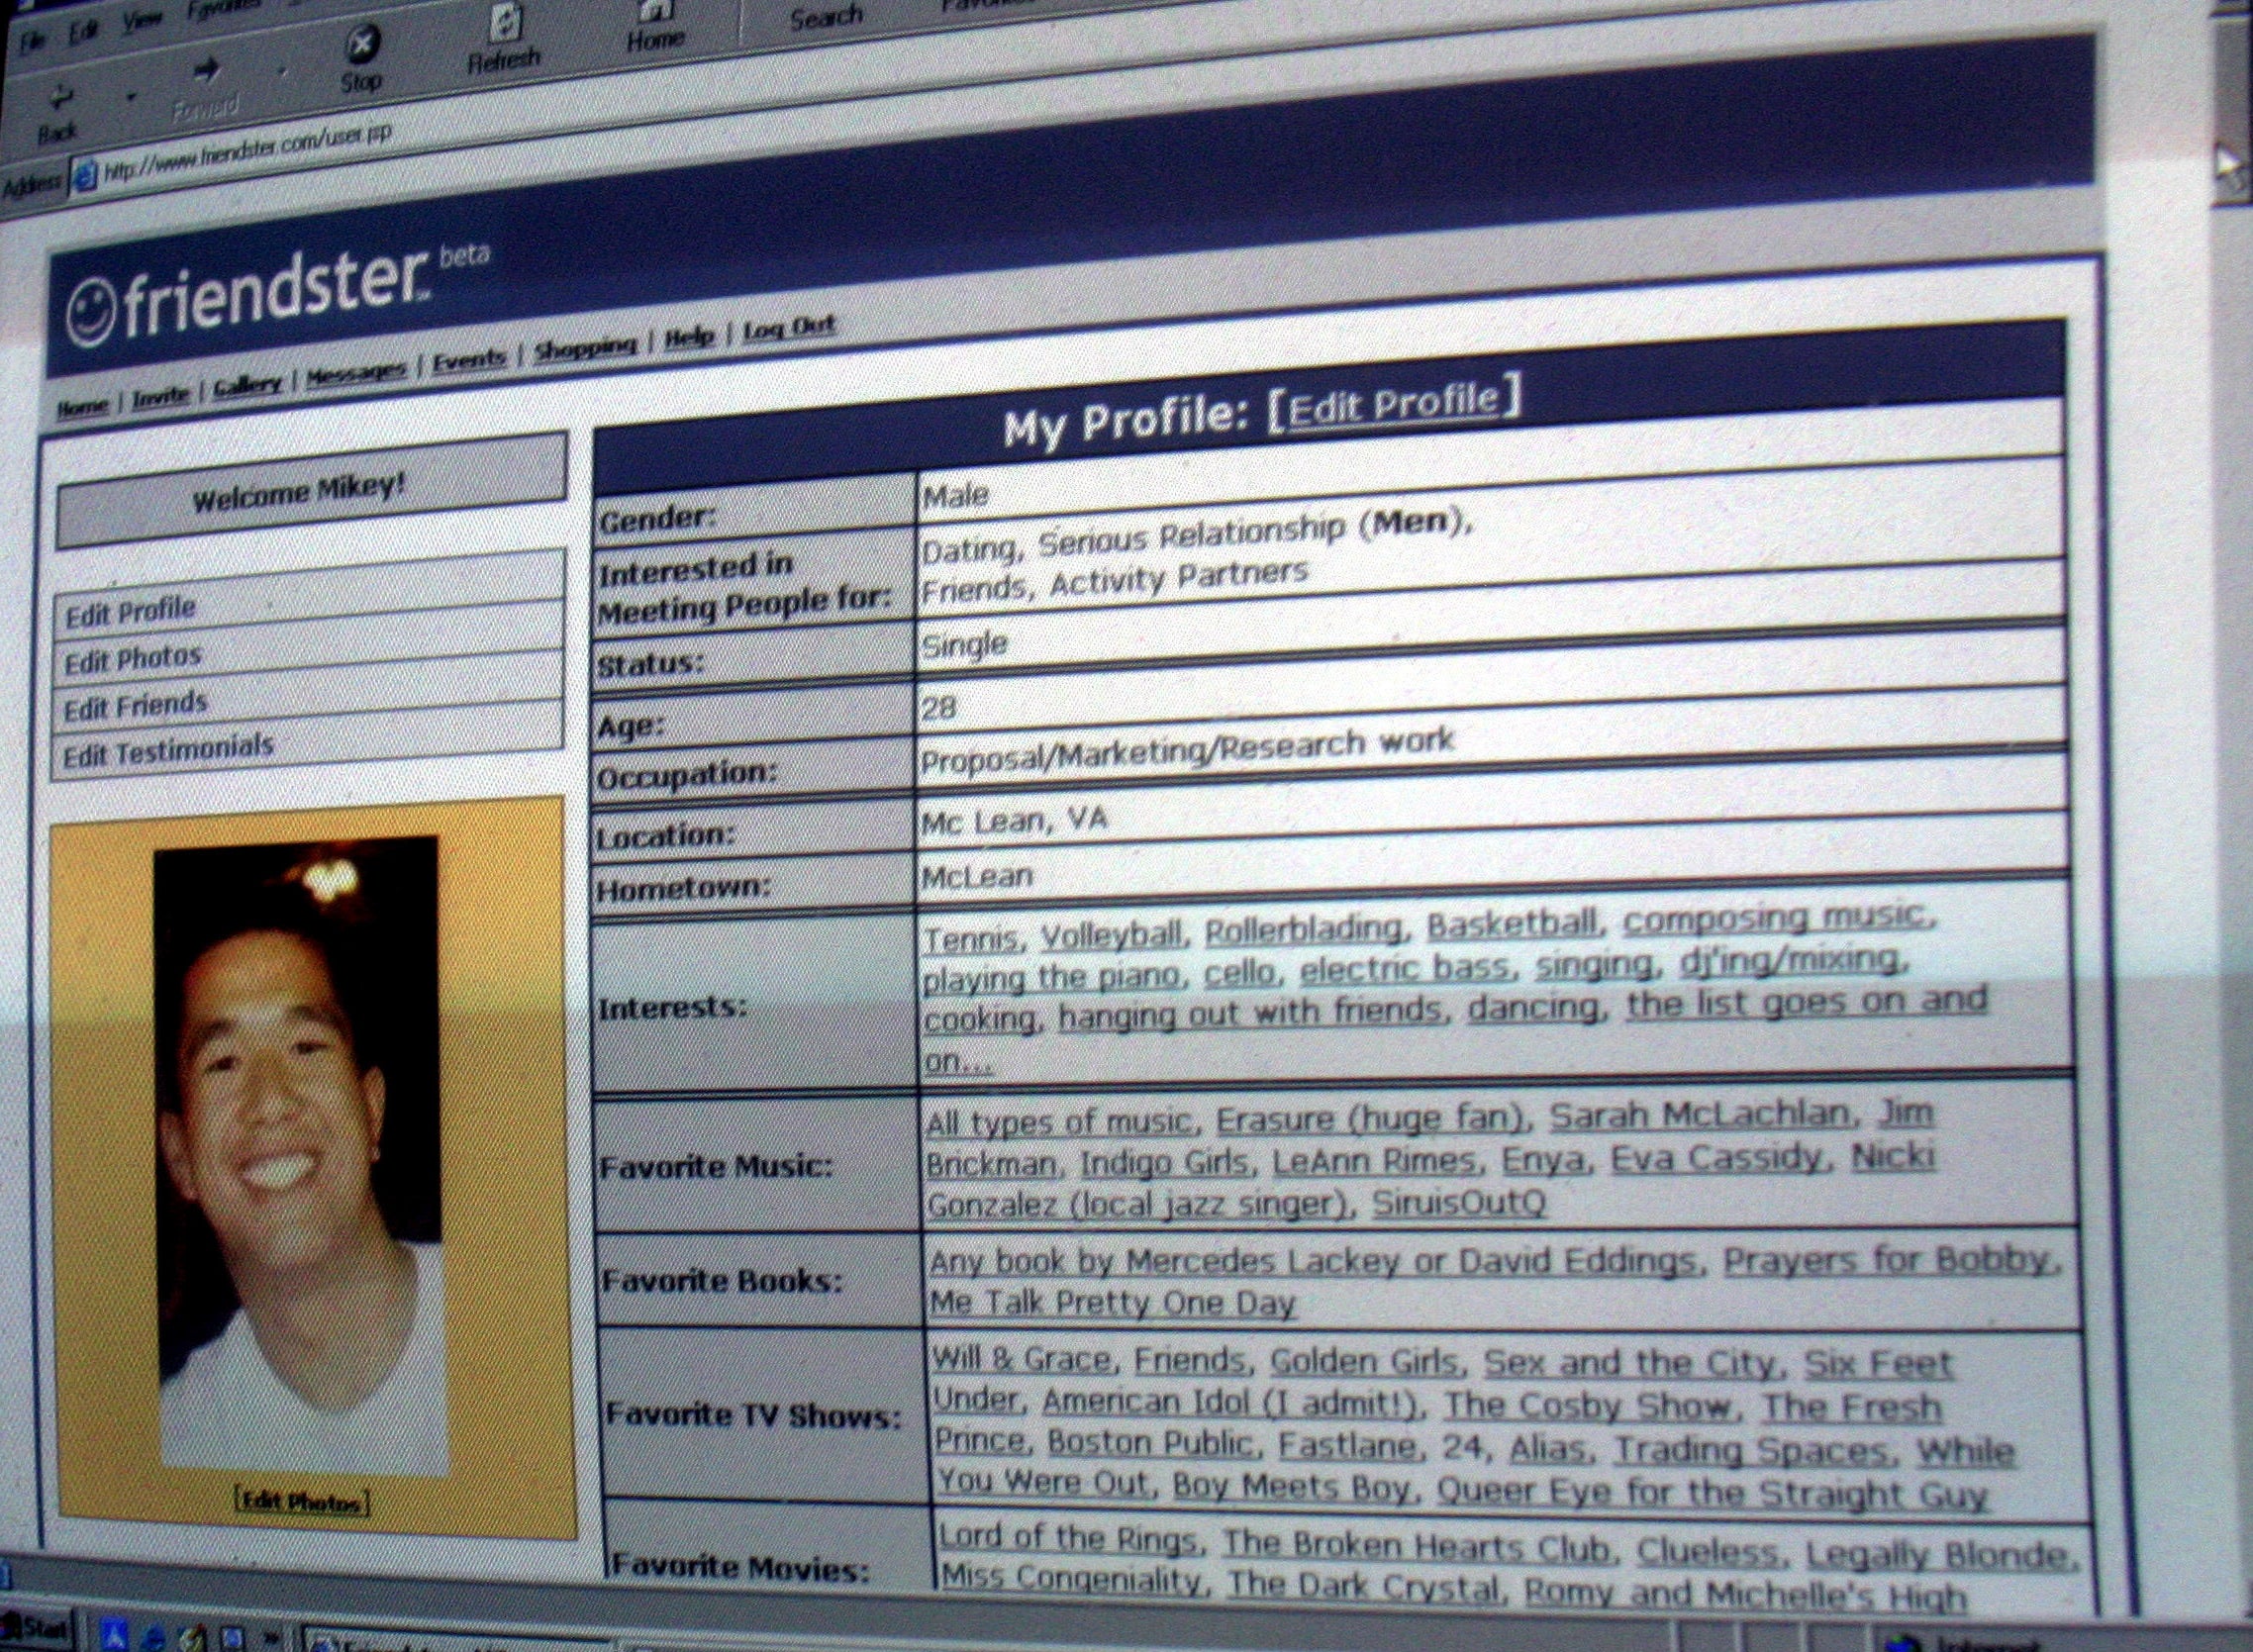 An old desktop monitor showing a Friendster page